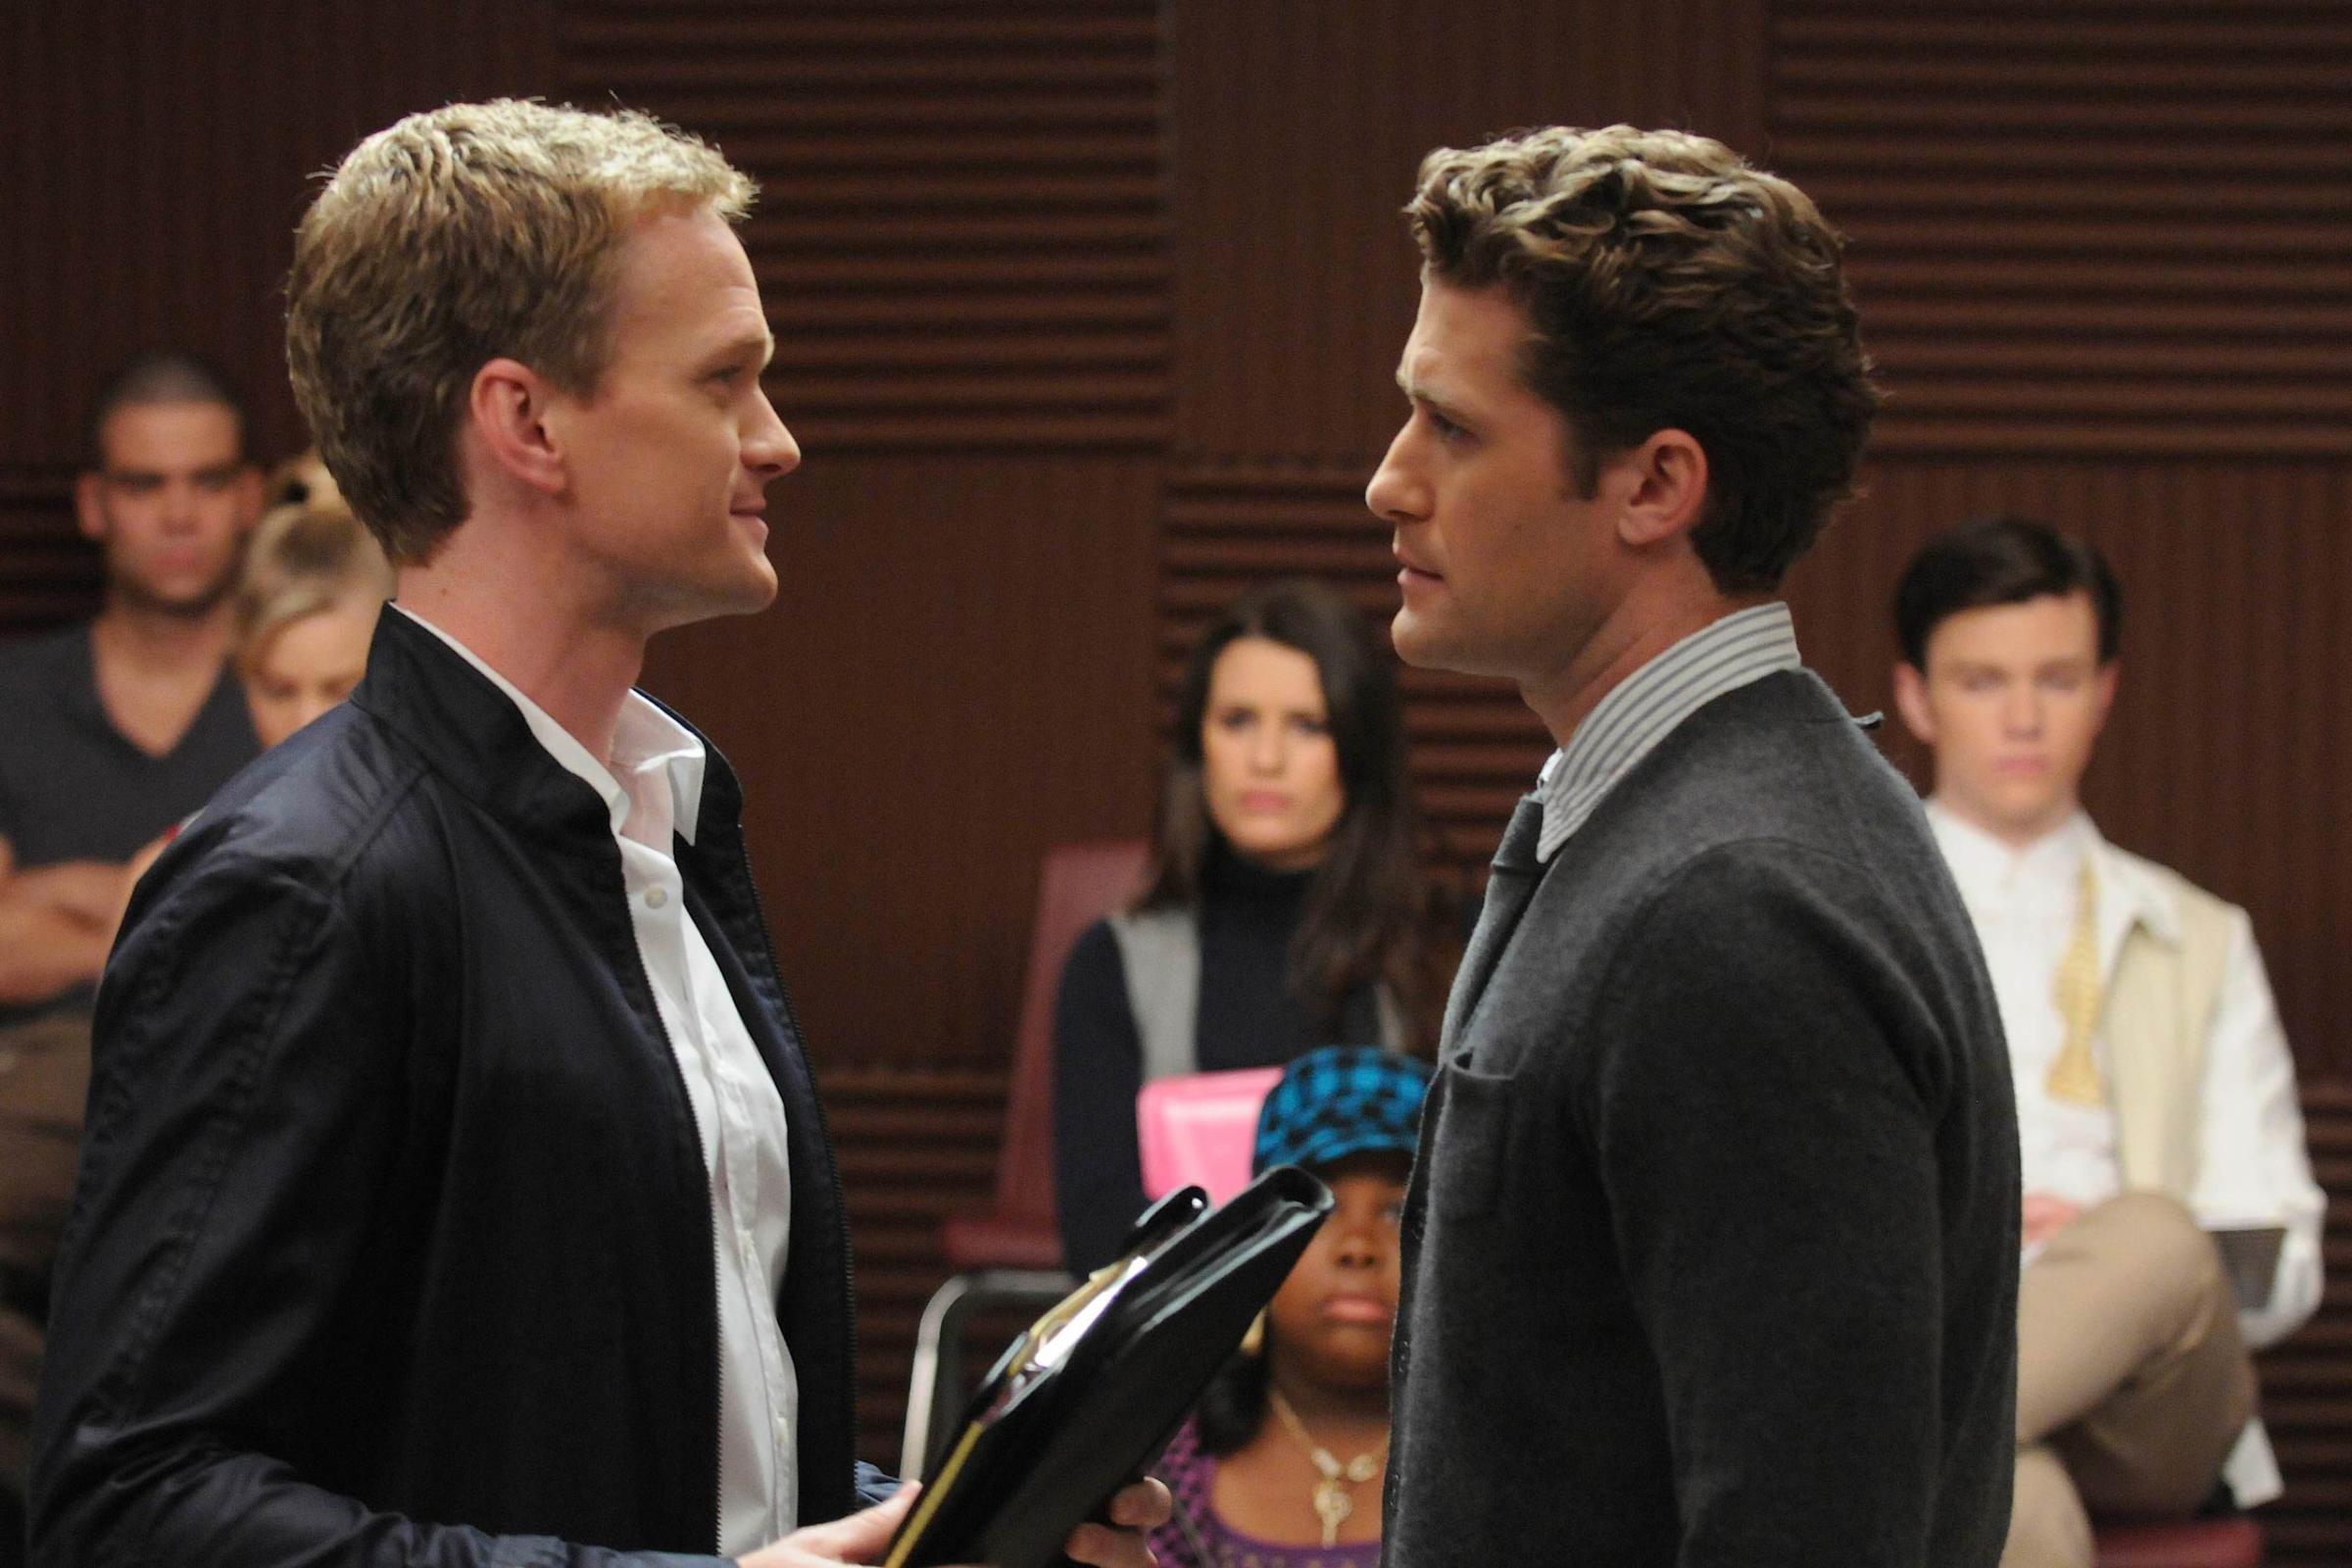 GLEE: School board member Bryan Ryan (guest star Neil Patrick Harris, L) evaluates Will's (Matthew Morrison, R) glee club in the "Dream On" episode of GLEE airing Tuesday, May 18 (9:00-10:00 PM ET/PT) on FOX. ©2010 Fox Broadcasting Co. Cr: Michael Yarish/FOX